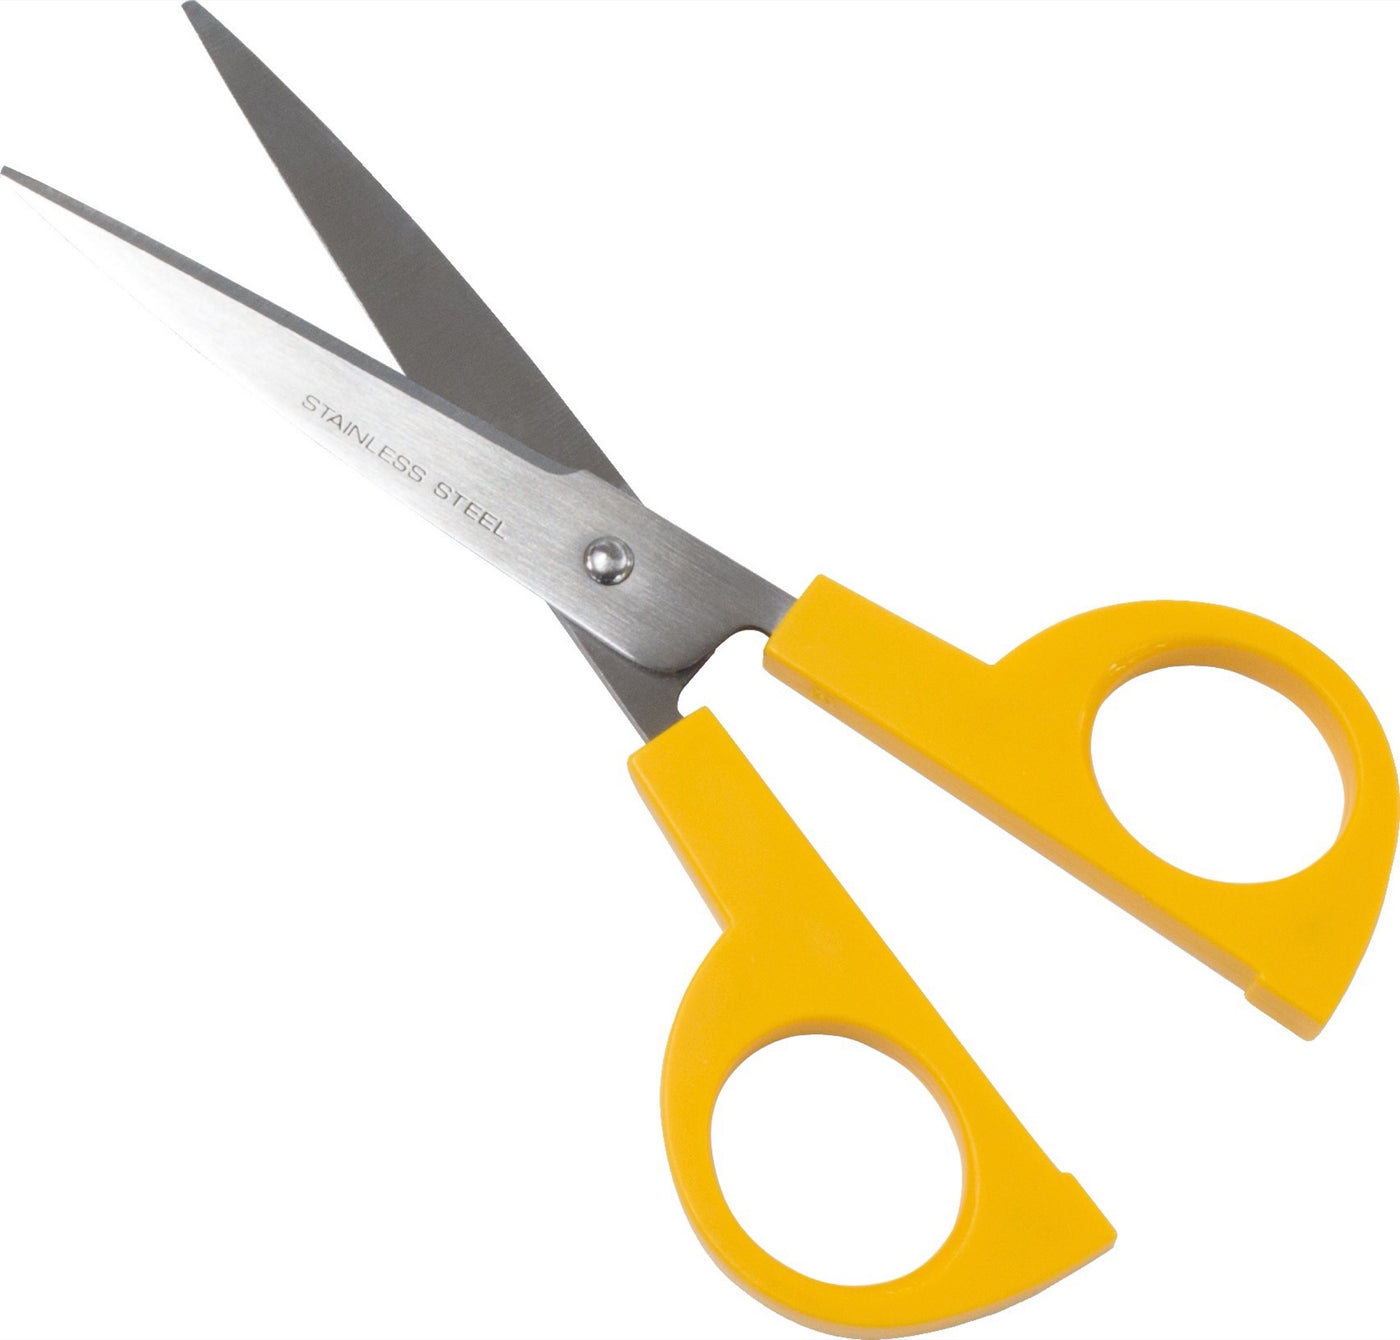 Olfa Scissors SCS-3, a cutting-edge tool that elevates precision and quality. Crafted with utmost care, these scissors boast exceptionally high-quality stainless steel blades that guarantee meticulous cutting. Whether you're a seasoned crafter or a novice, these scissors provide unmatched accuracy.